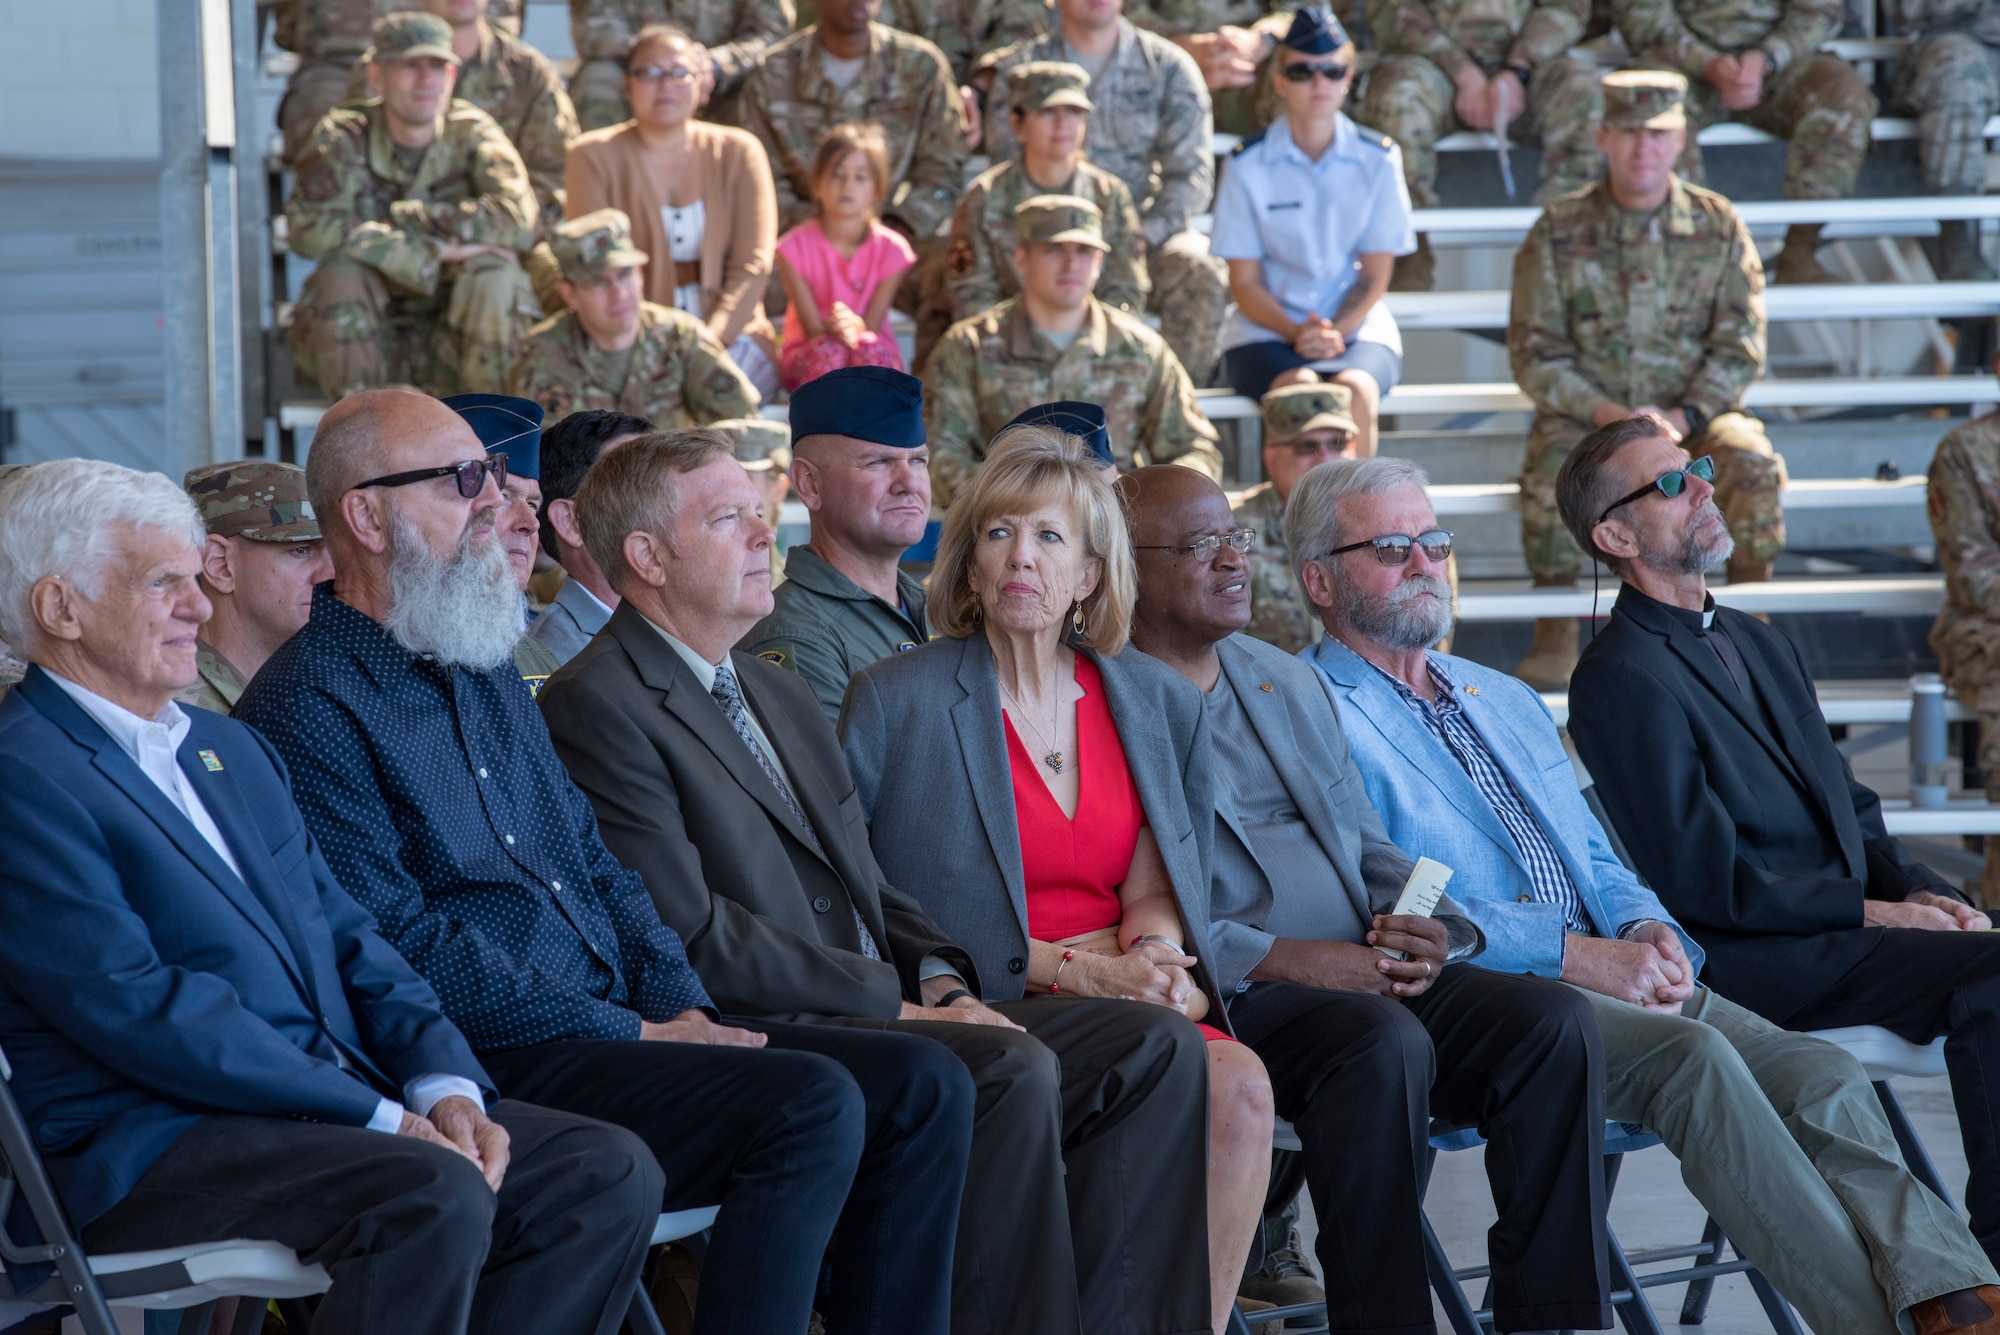 Community leaders from Solano County and members of Team Travis listen to speeches during the 60th Operations Group change of command ceremony July 26, 2019, at Travis Air Force Base, California. During the ceremony, U.S. Air Force Col. Theresa Weems, outgoing 60th OG commander, transferred command to Col. Gregg Johnson. (U.S. Air Force photo by Tech. Sgt. James Hodgman)